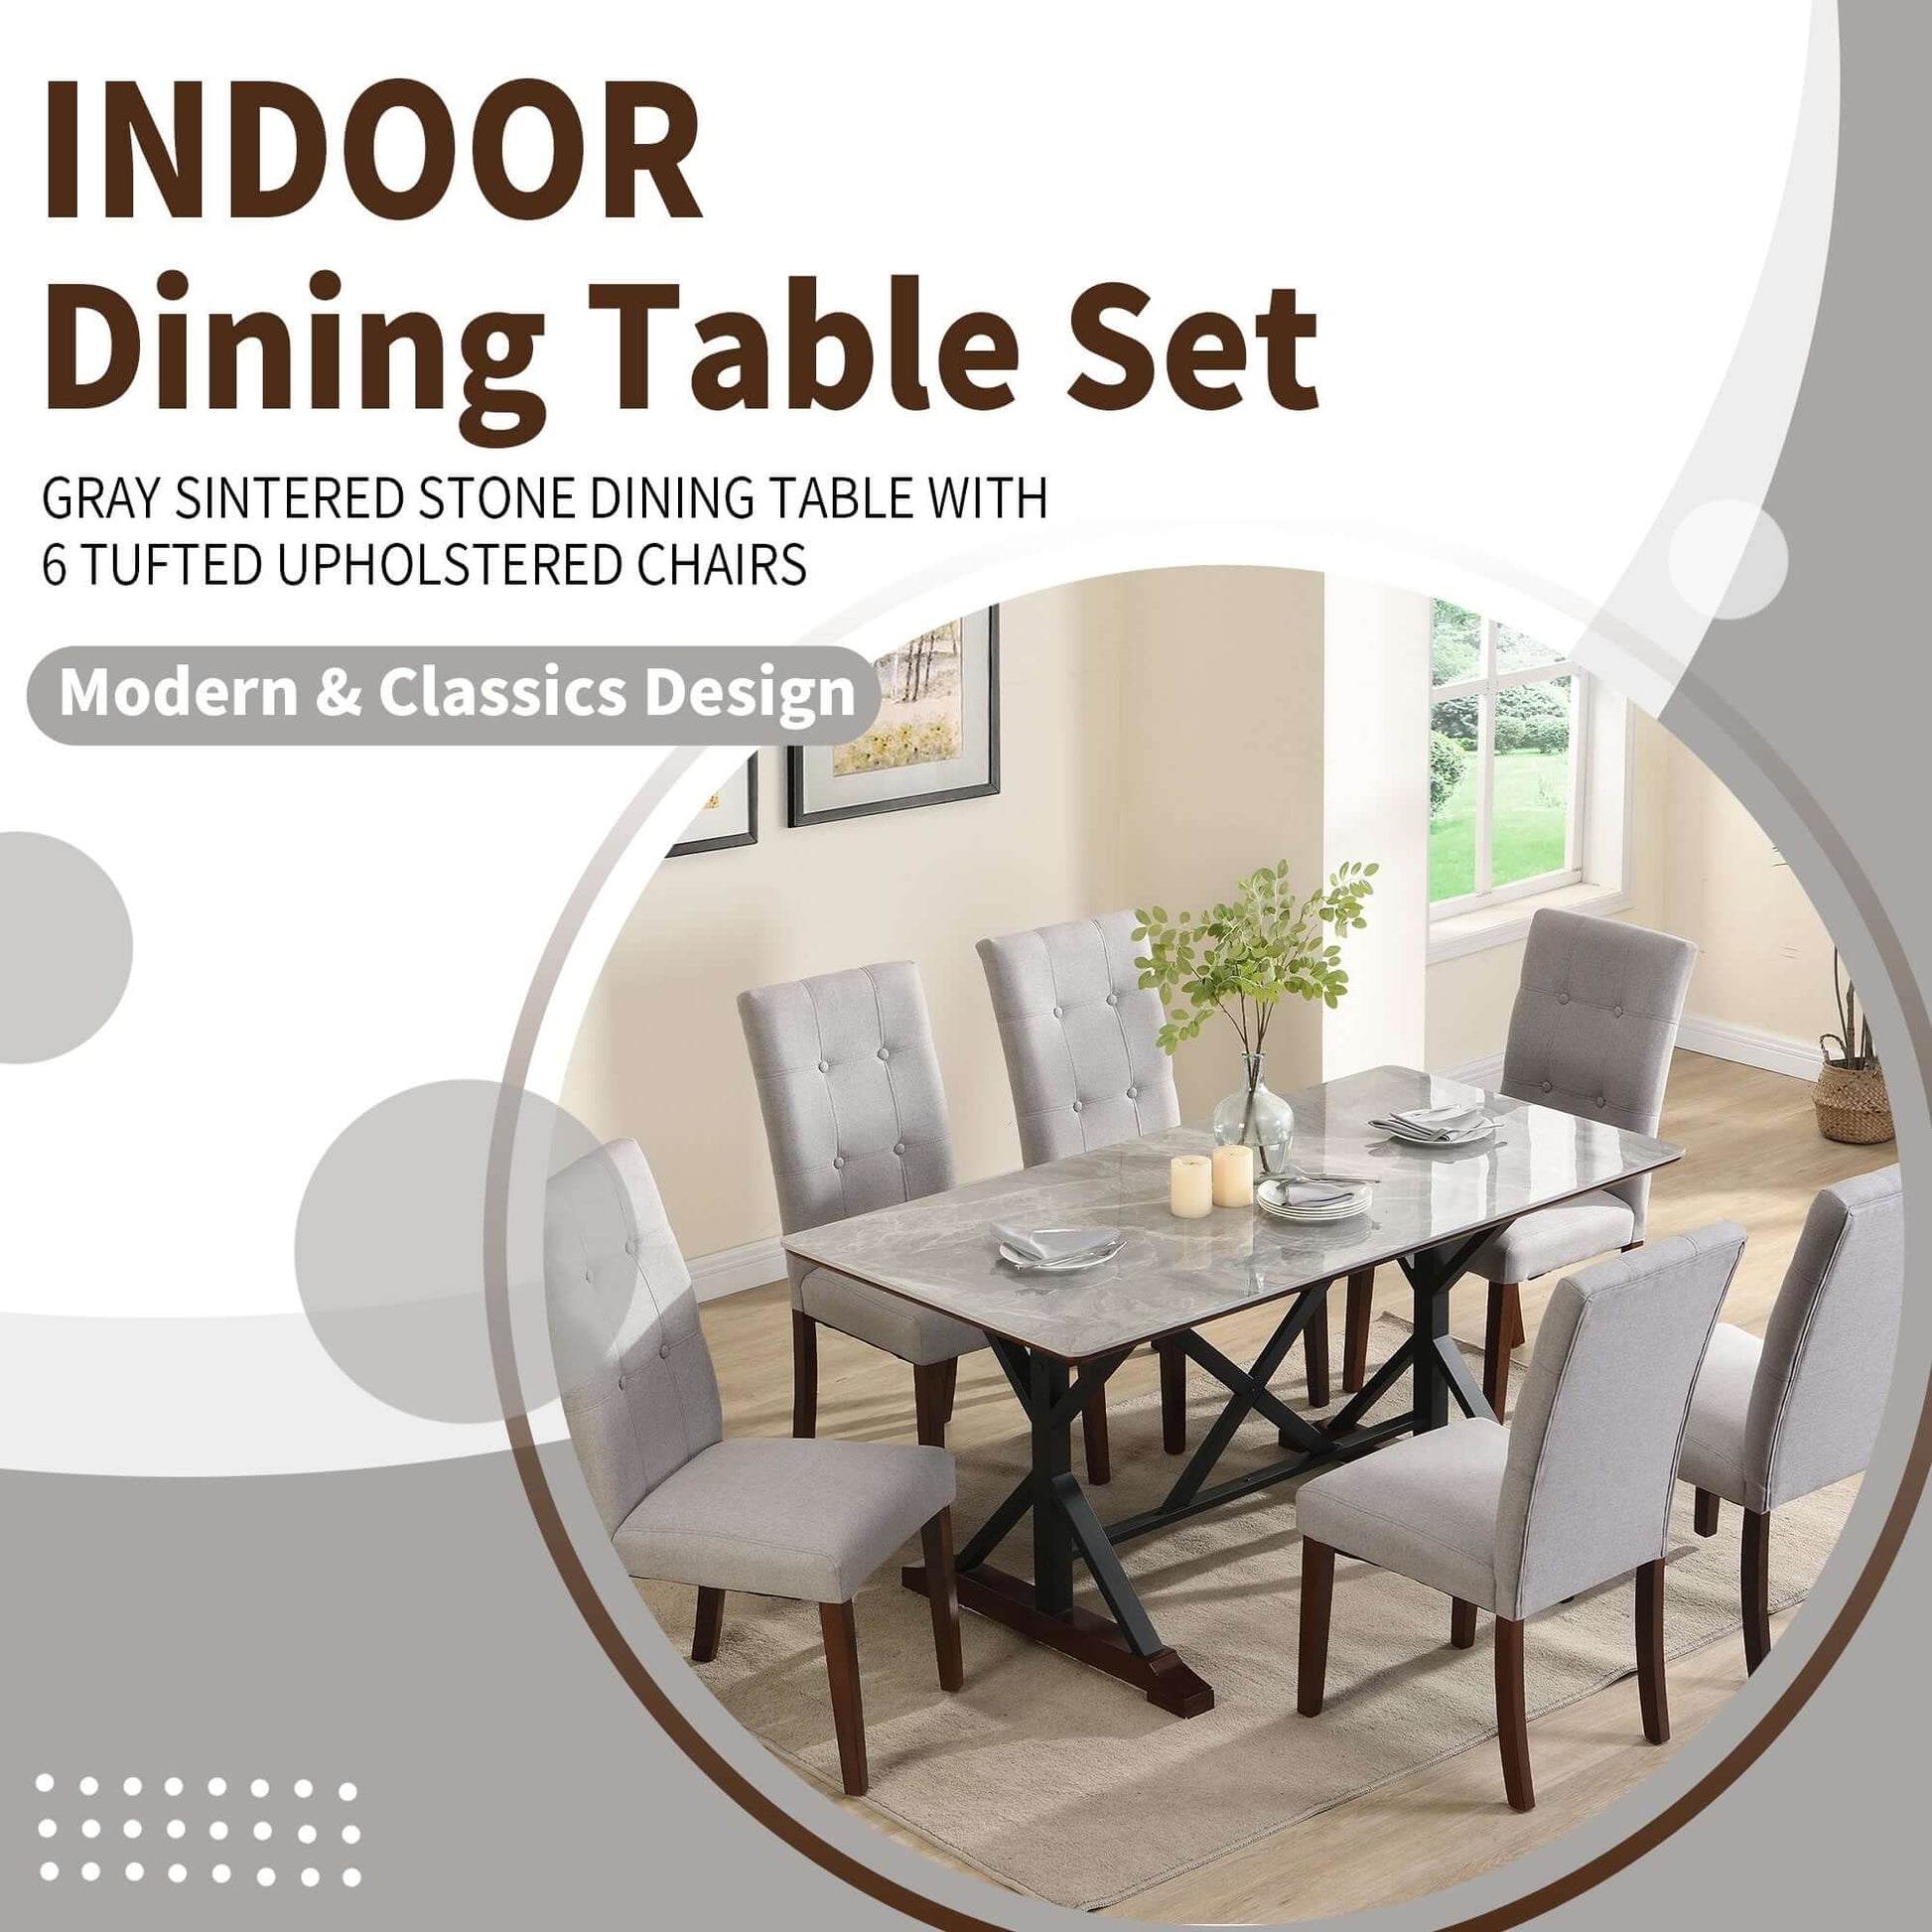 7-piece modern dining table set with gray sintered stone dining table and 6 tufted upholstered chairs in a contemporary dining room.